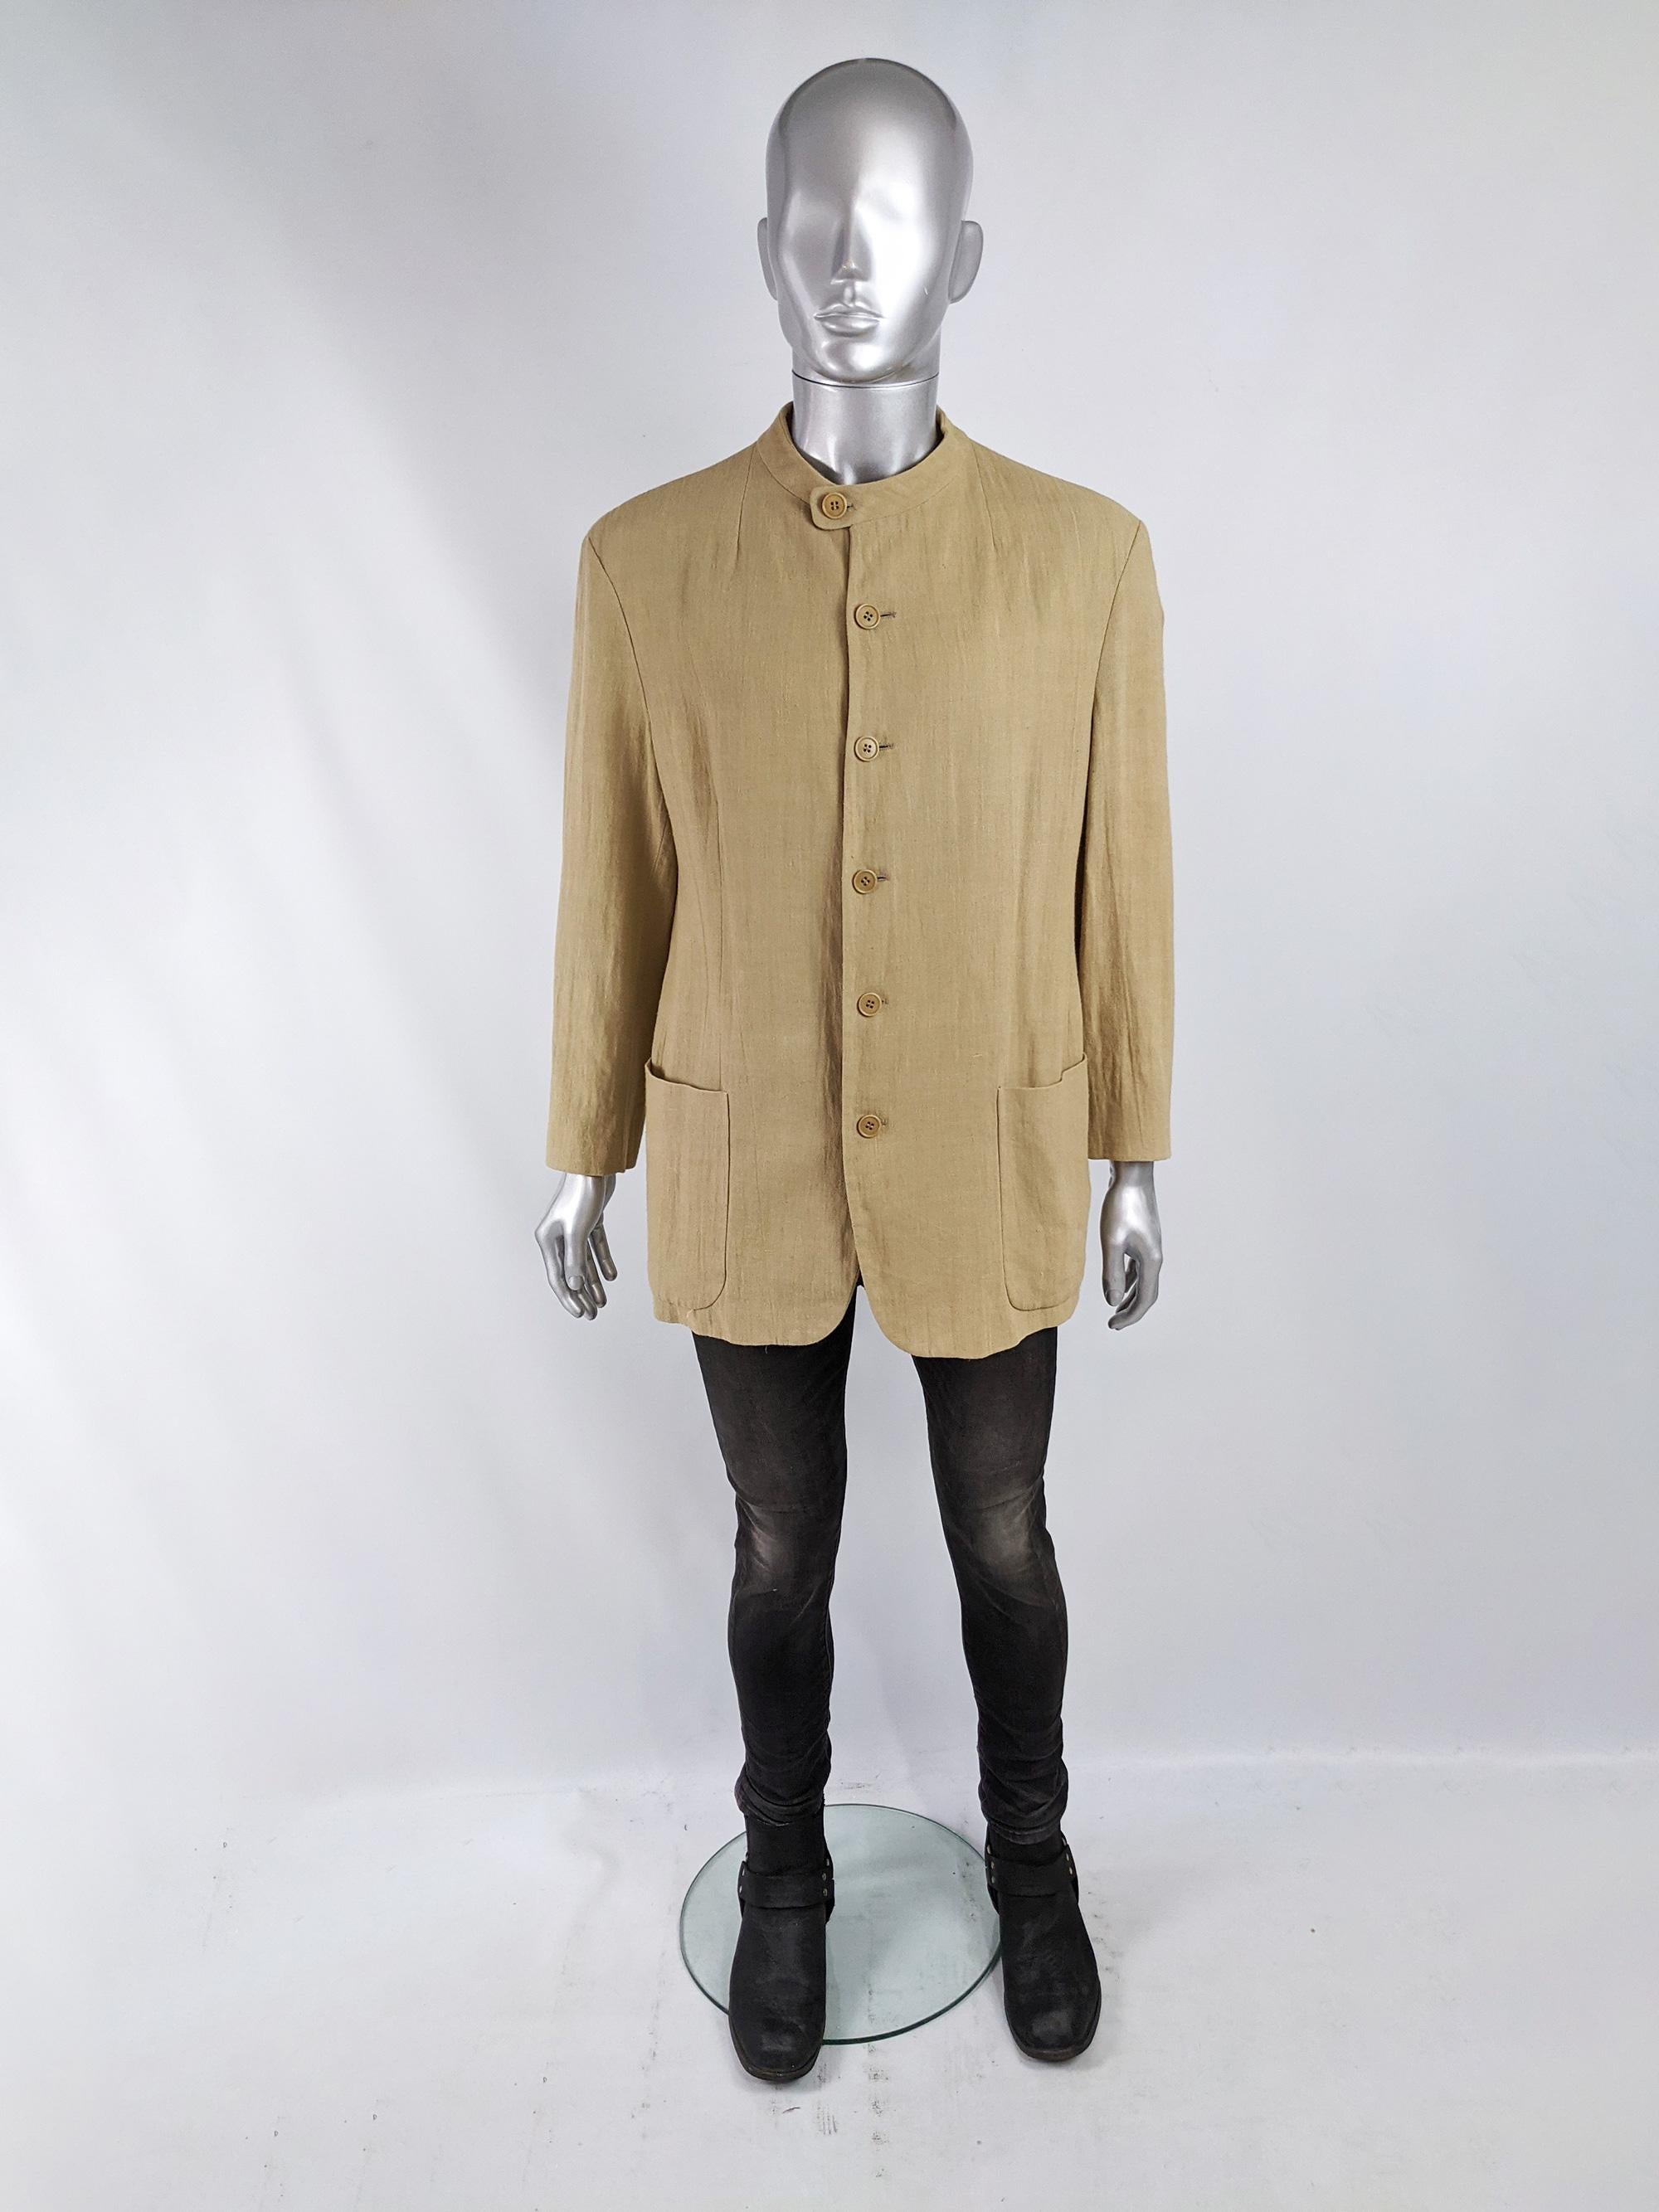 A stylish vintage mens minimalist blazer jacket by Giorgio Armani for the Emporio Armani line. In a beige coloured woven viscose jacket with a collarless / nehru style collar that fastens with a button at one side.  

Size: Marked 50R which equates